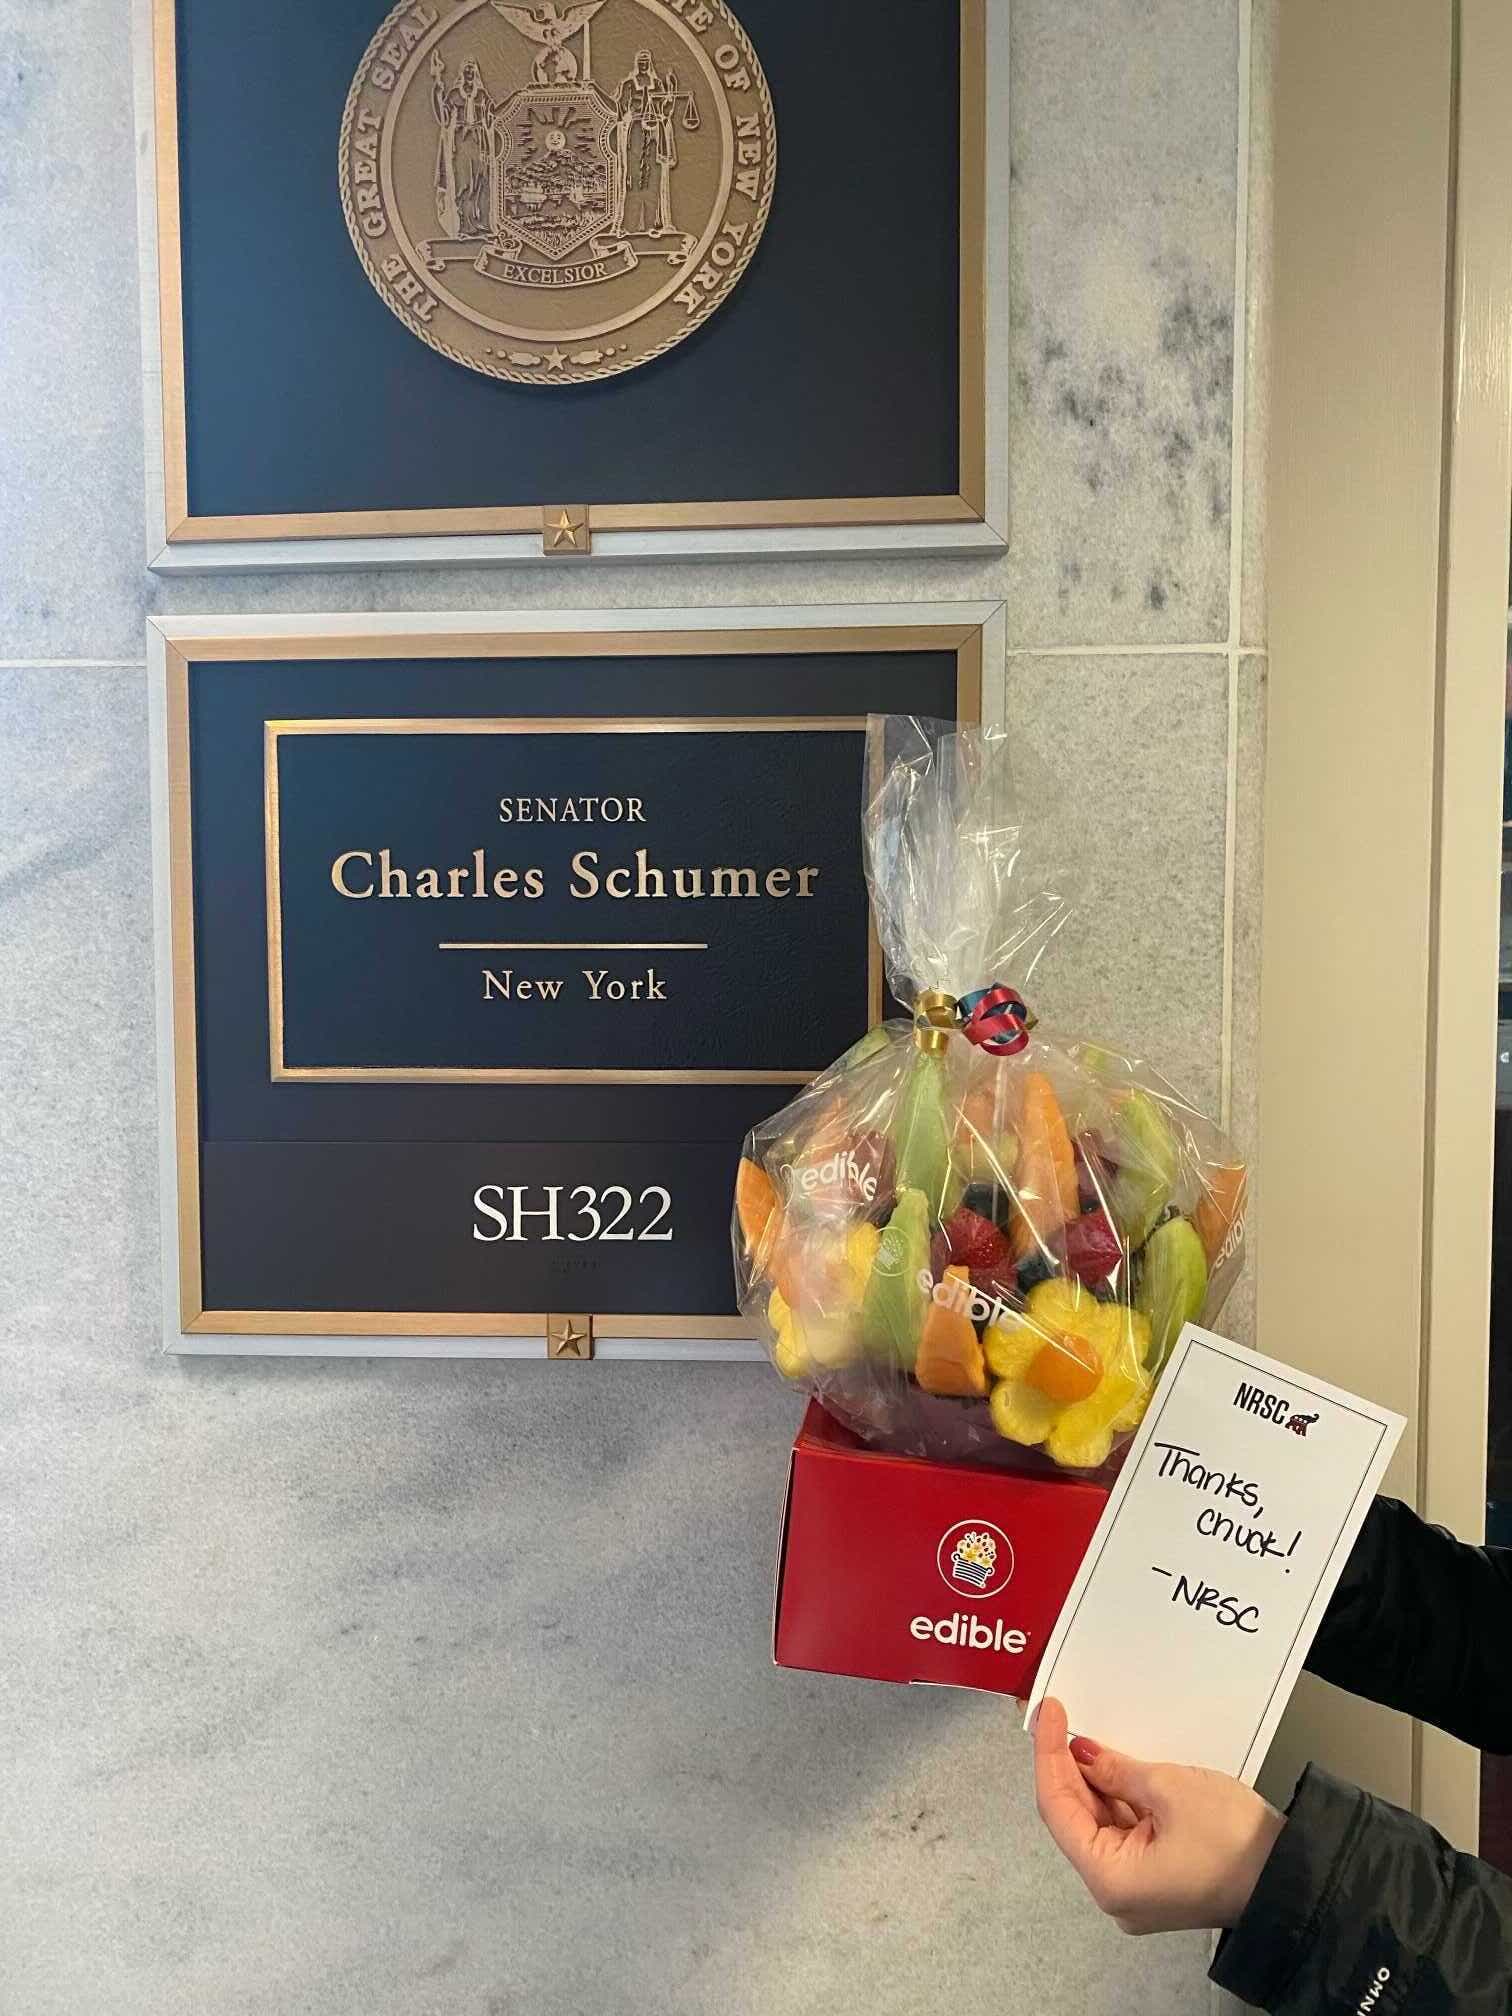 Senate GOP campaign arm sends Schumer gift basket for forcing vulnerable members to take filibuster stand